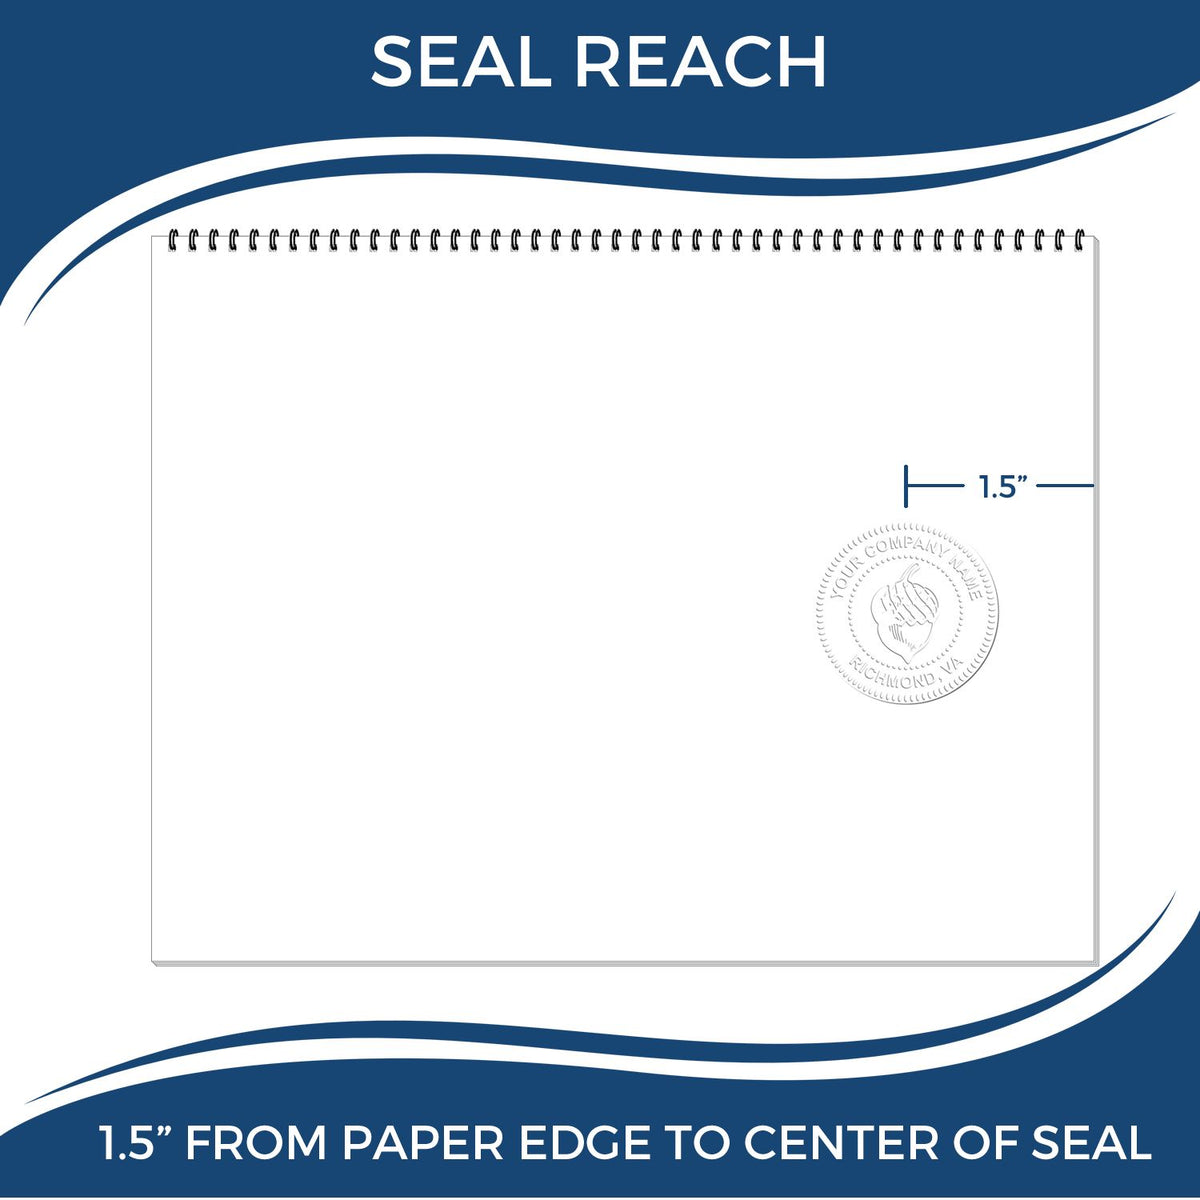 An infographic showing the seal reach which is represented by a ruler and a miniature seal image of the Gift South Carolina Landscape Architect Seal